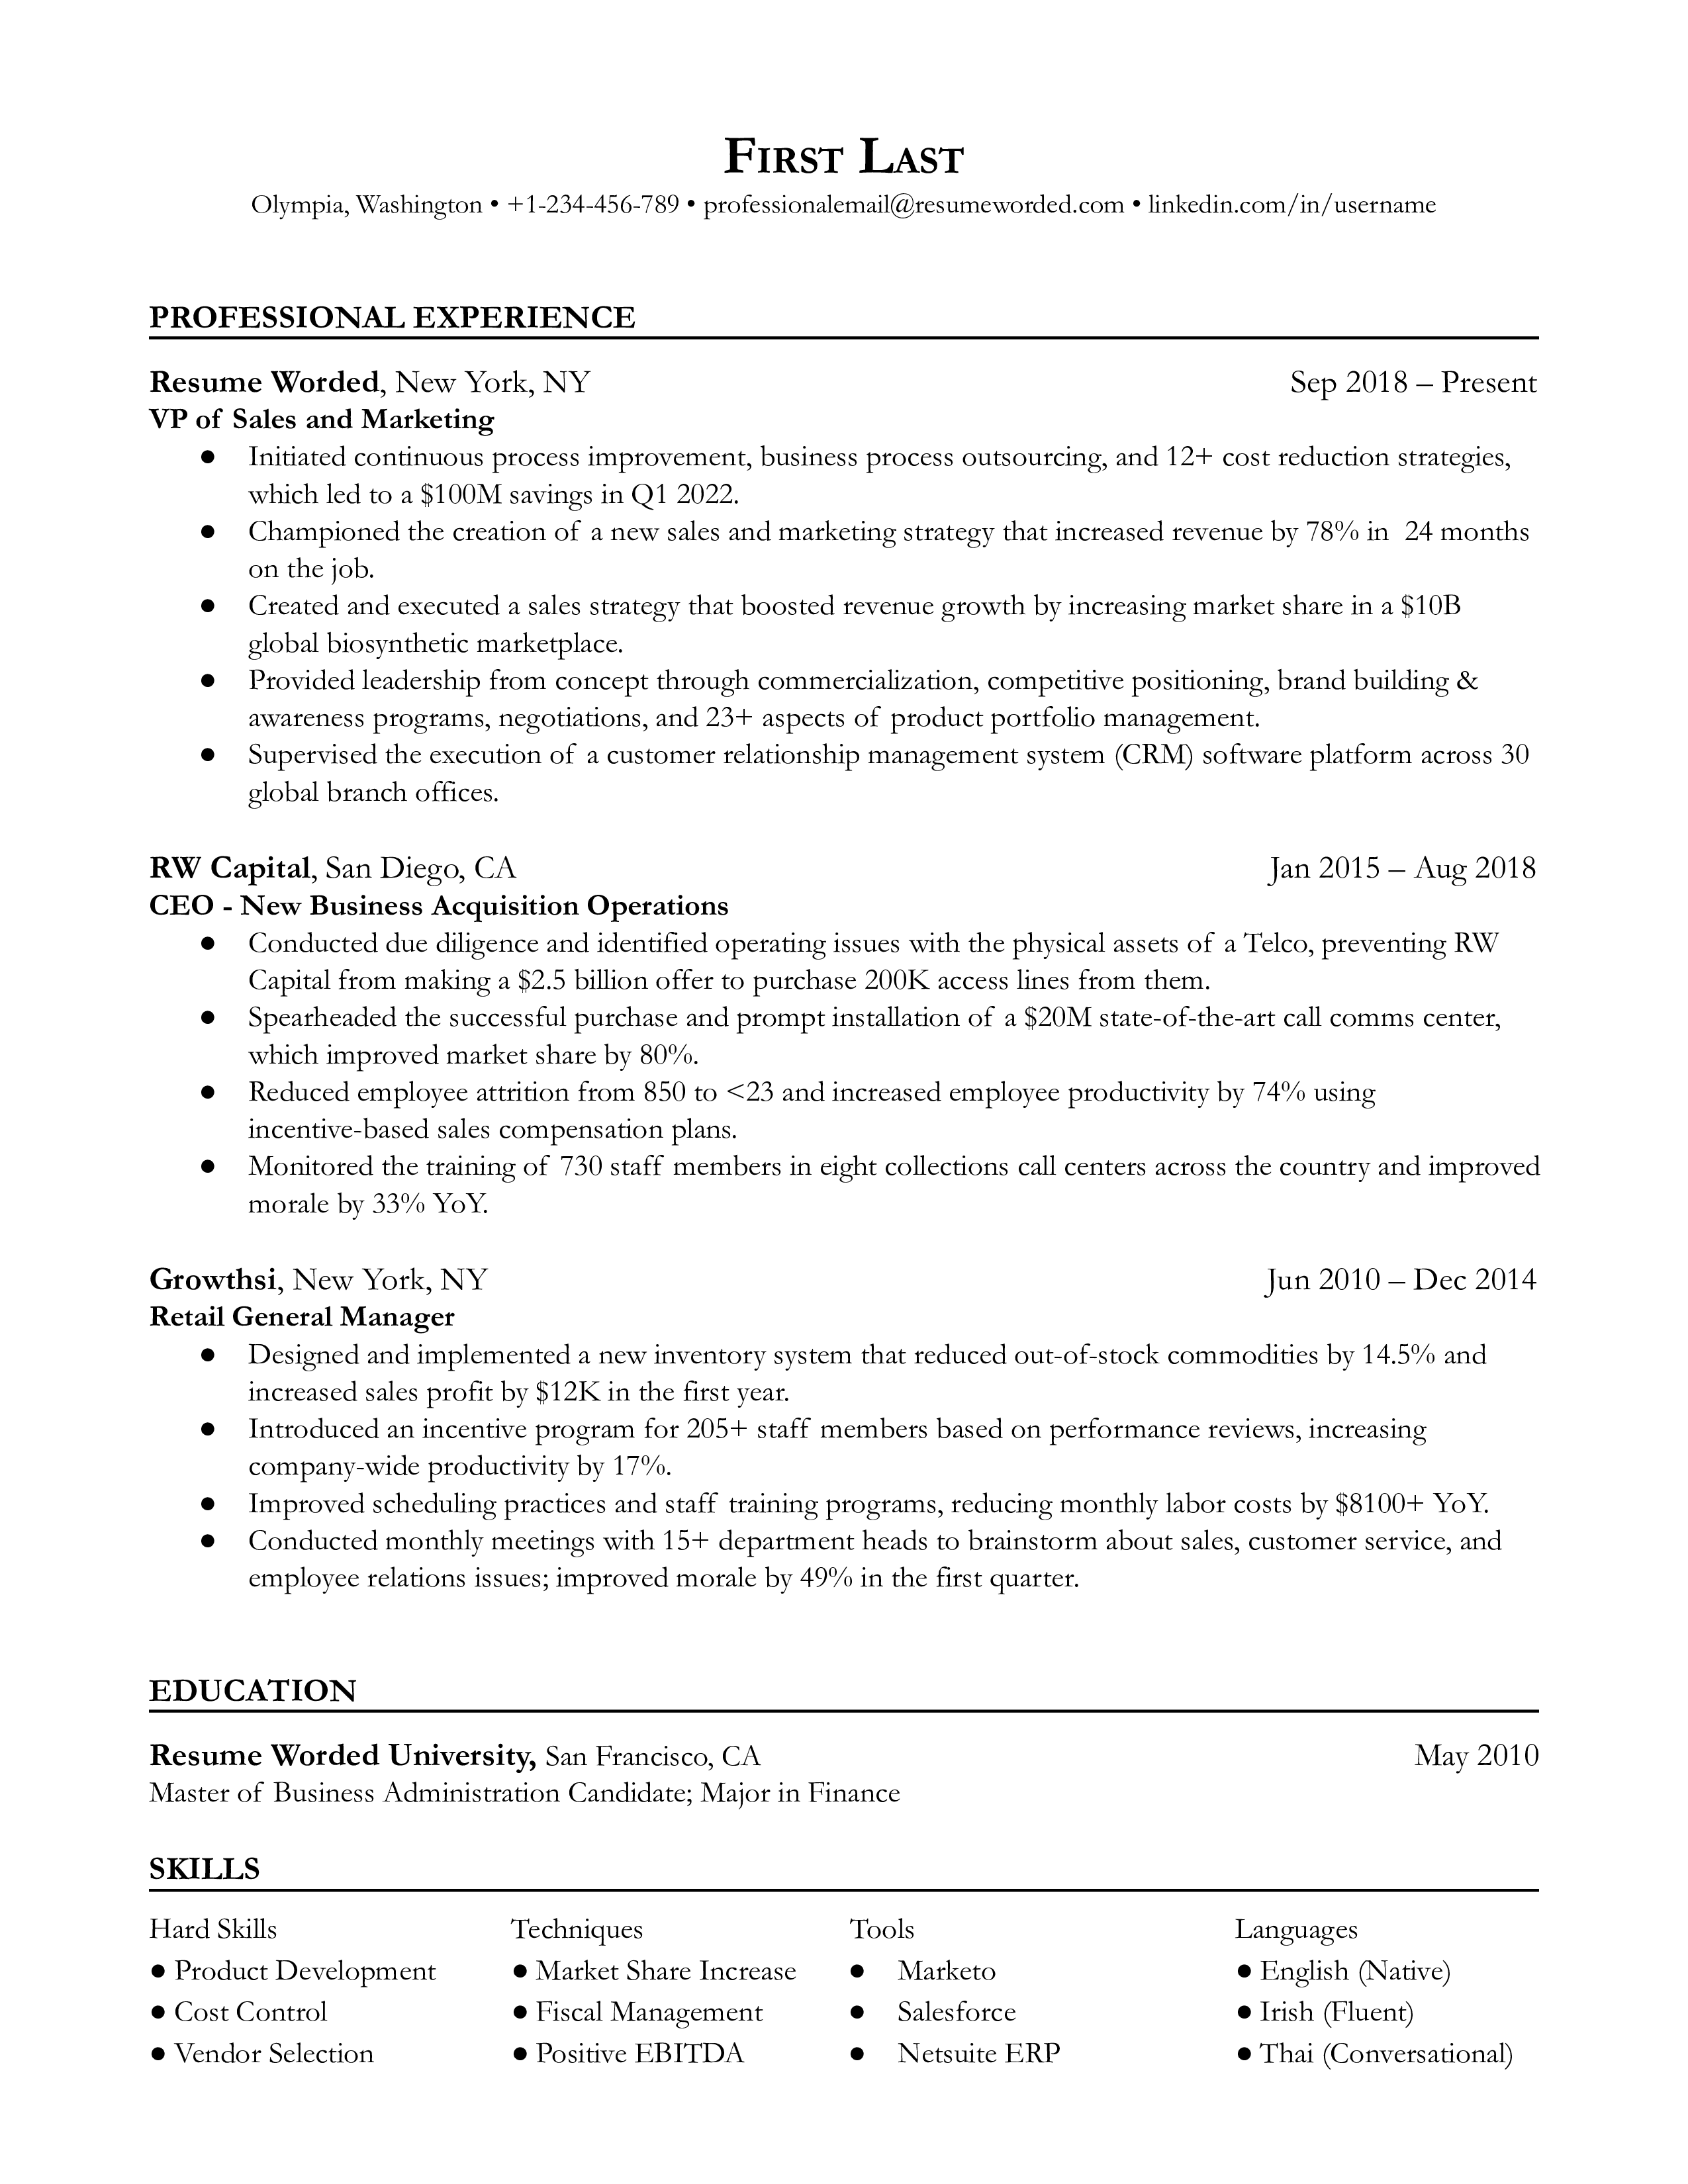 A VP of sales and marketing resume sample that highlights the applicant’s quantifiable success and experience.